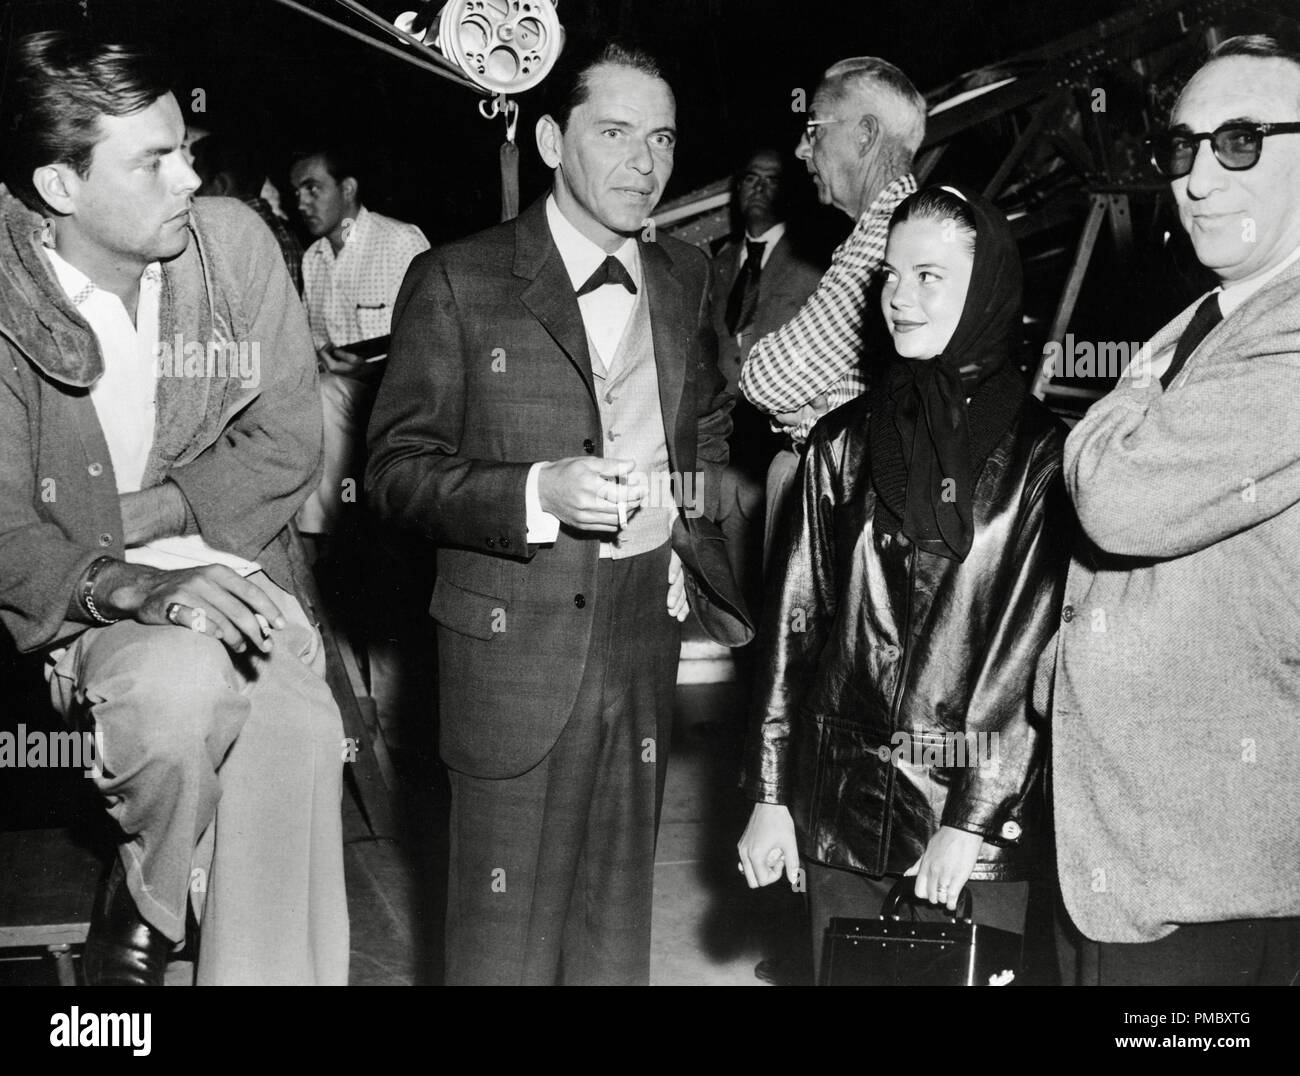 Robert Wagner, Frank Sinatra and Natalie wood, on the set of 'Can Can' (1960) 20th Century Fox  File Reference # 33300 100THA Stock Photo